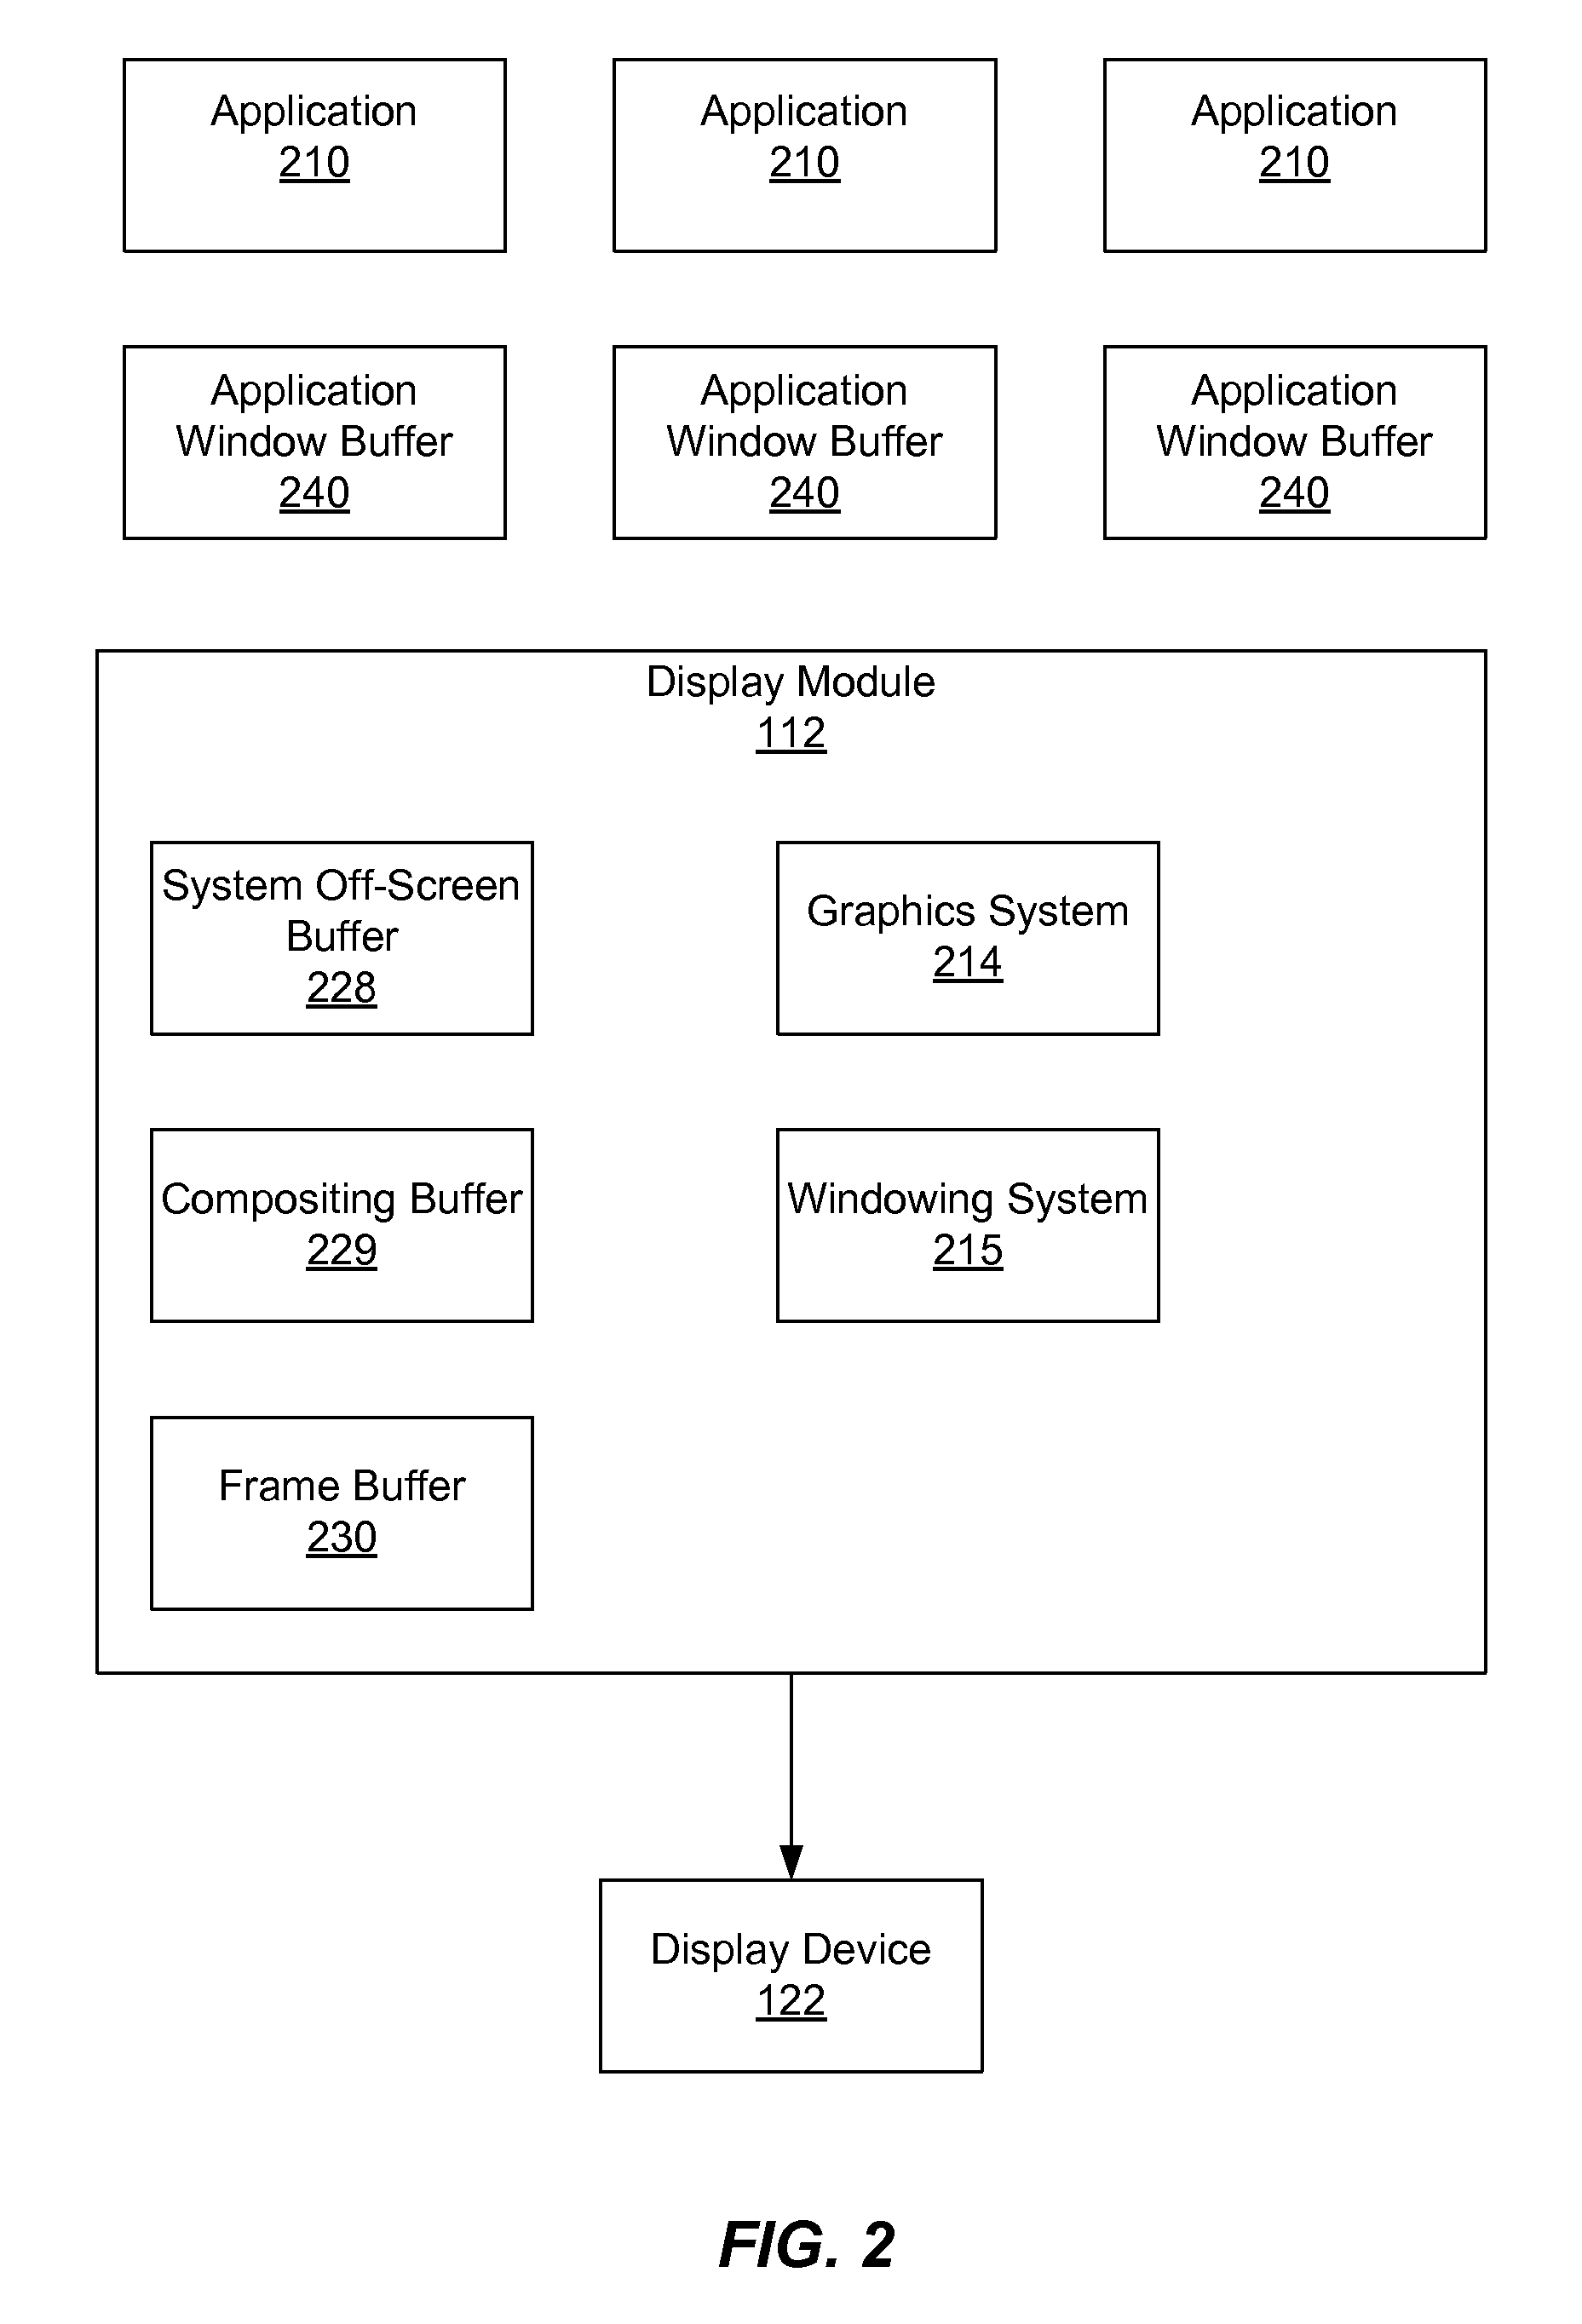 Compositing Windowing System